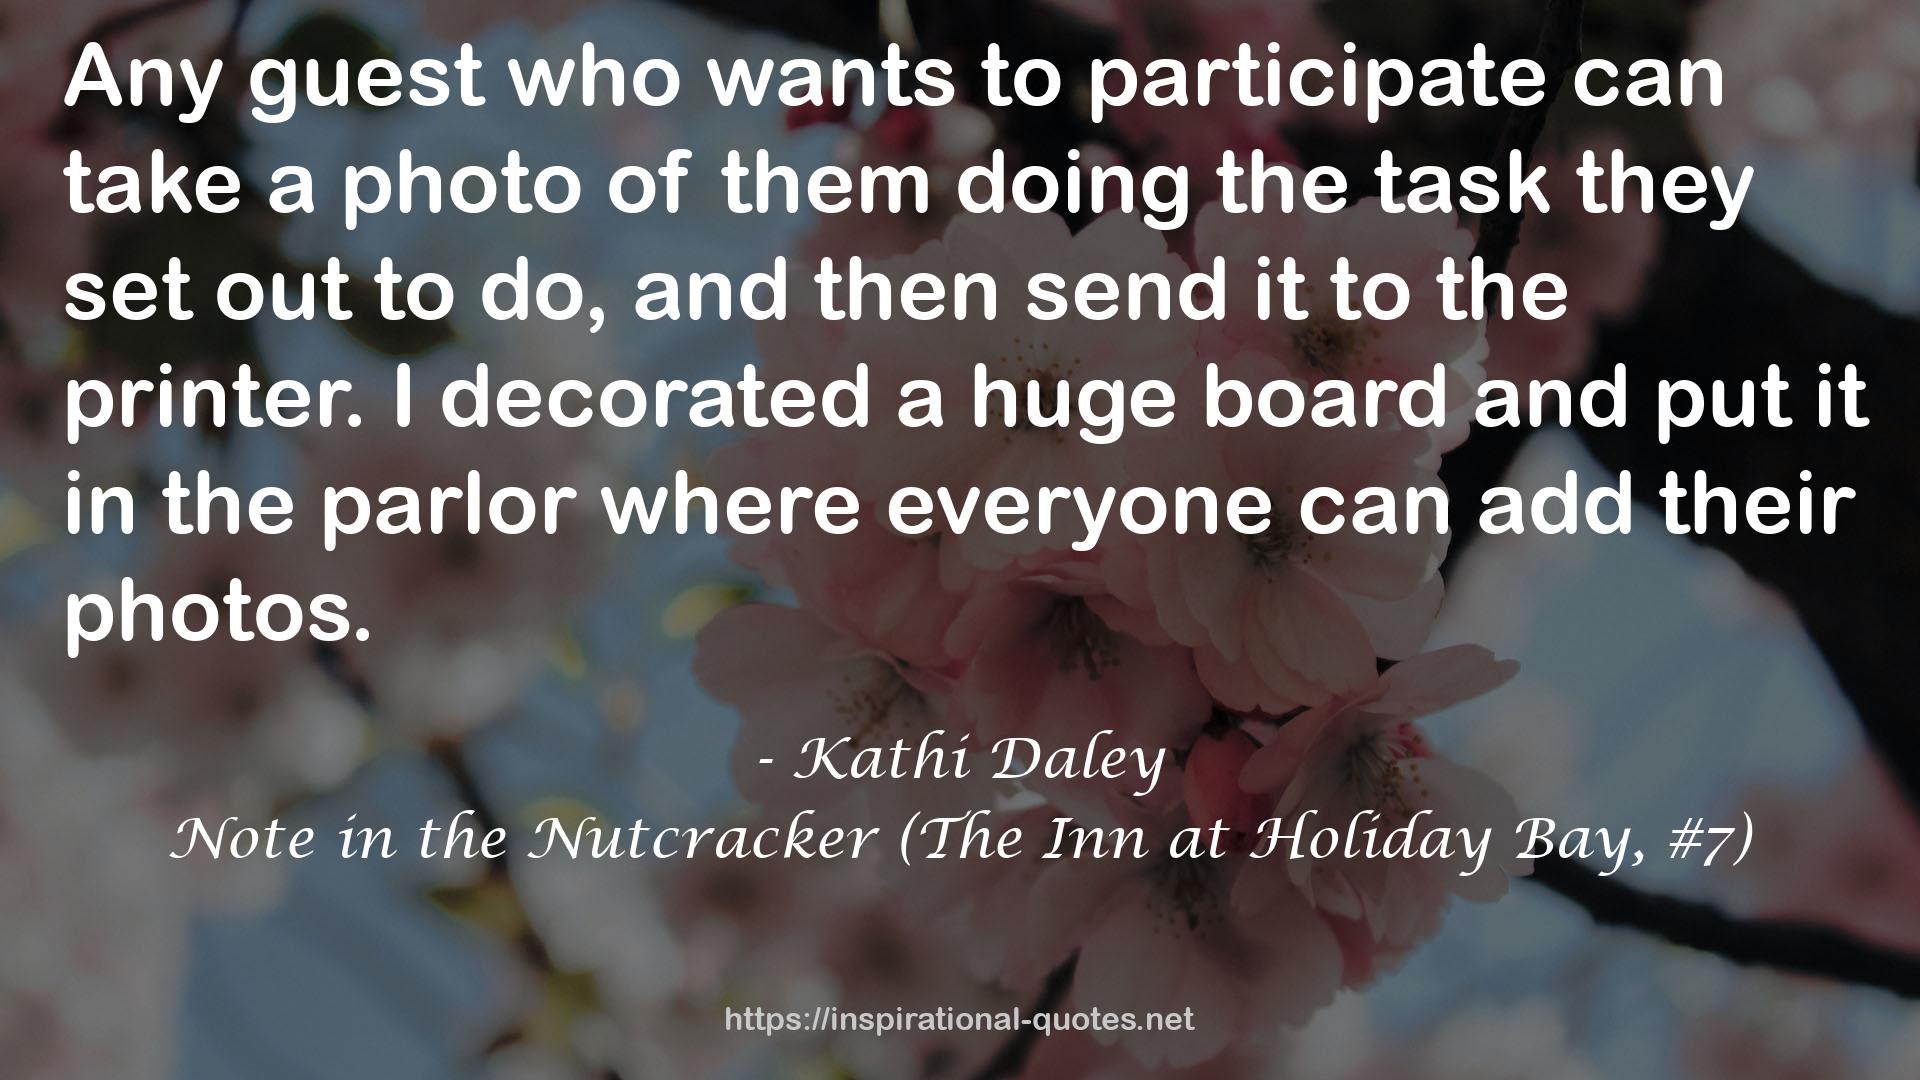 Note in the Nutcracker (The Inn at Holiday Bay, #7) QUOTES